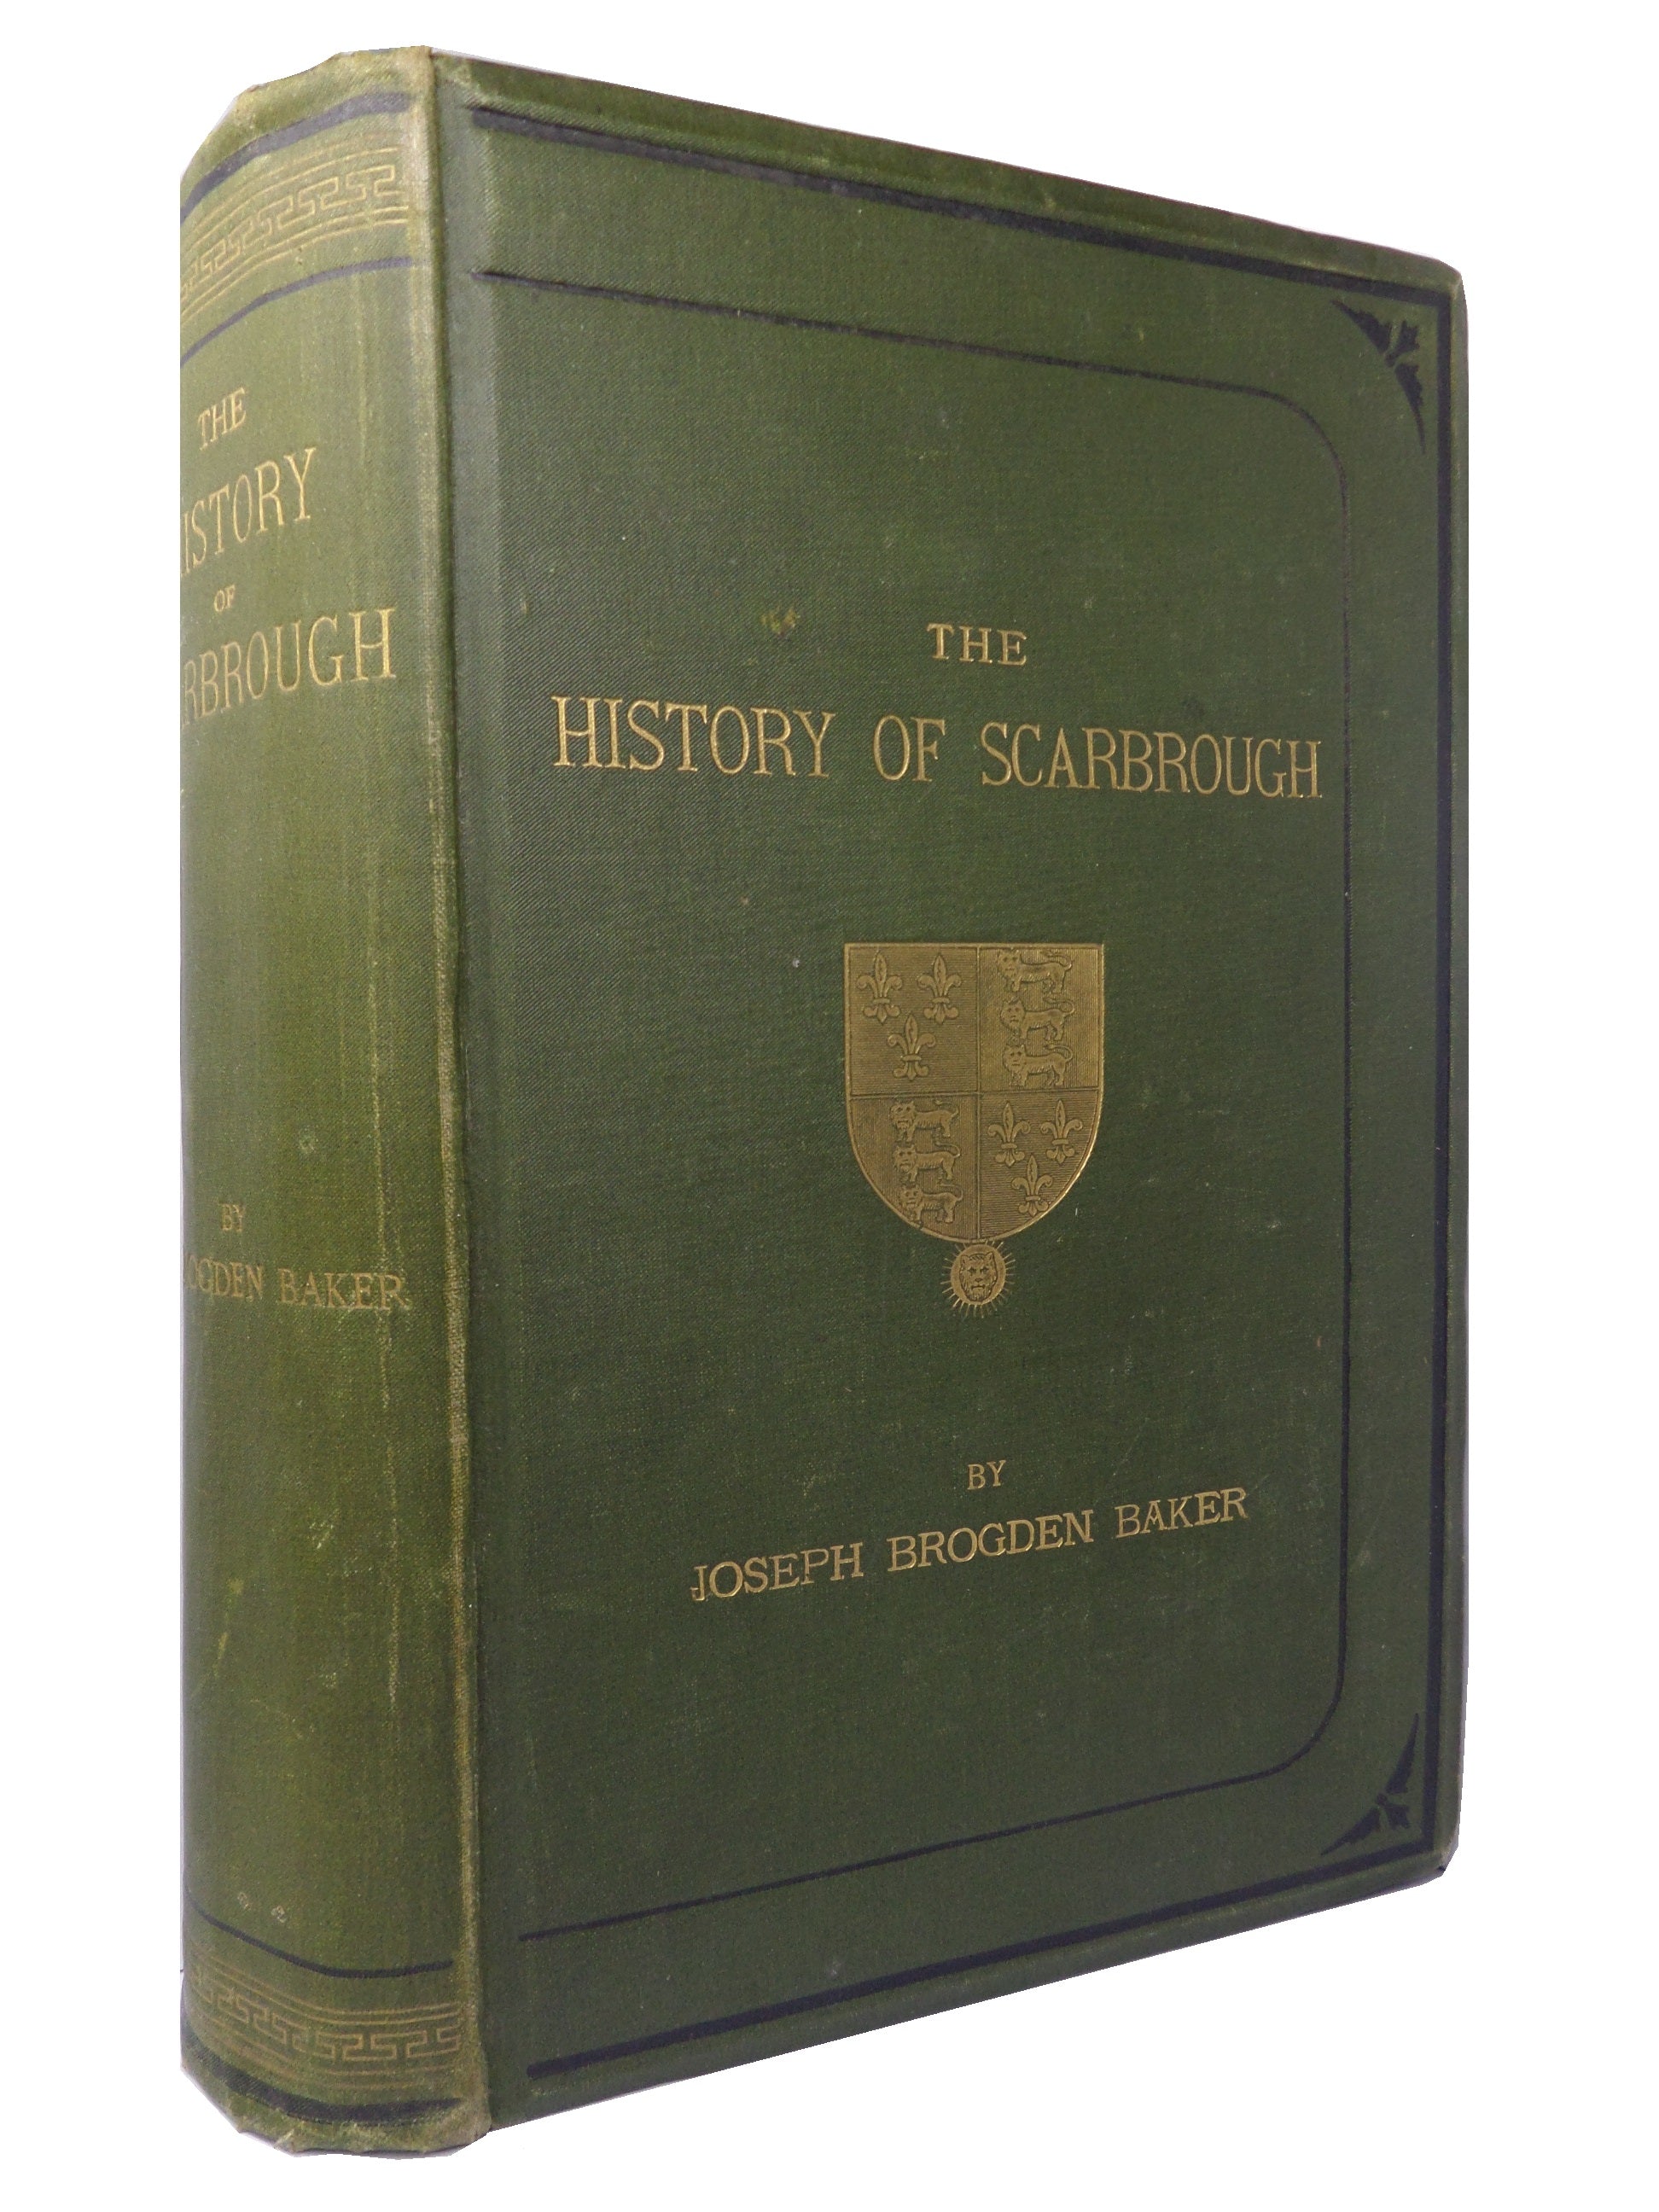 THE HISTORY OF SCARBROUGH BY JOSEPH BROGDEN BAKER 1882 FIRST EDITION